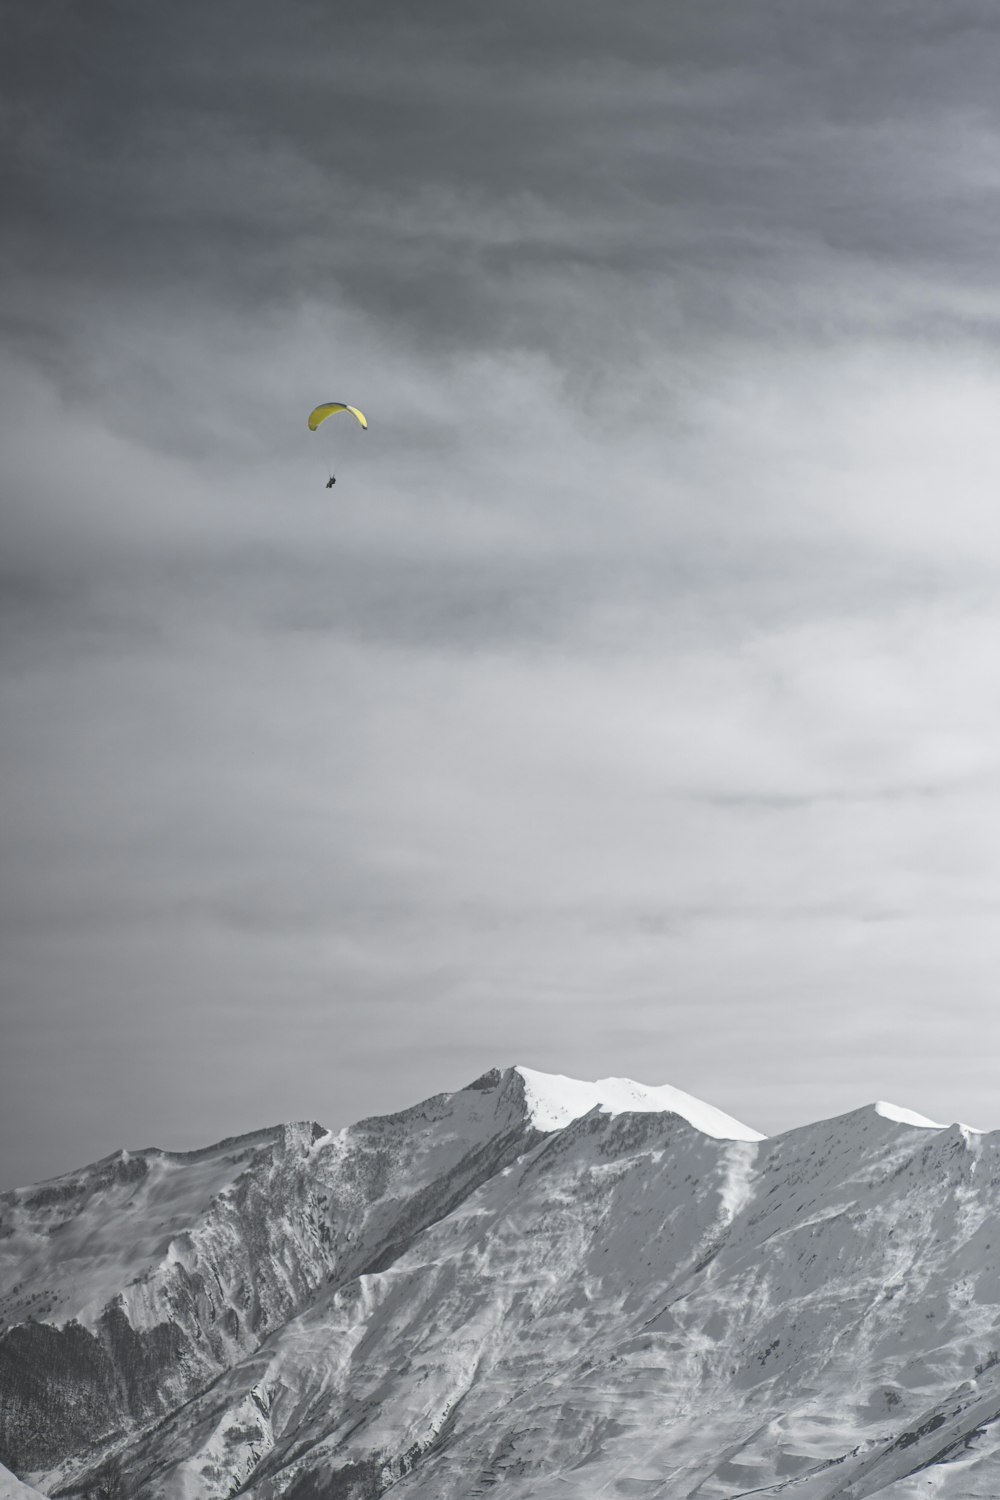 a paraglider is flying over a snowy mountain range